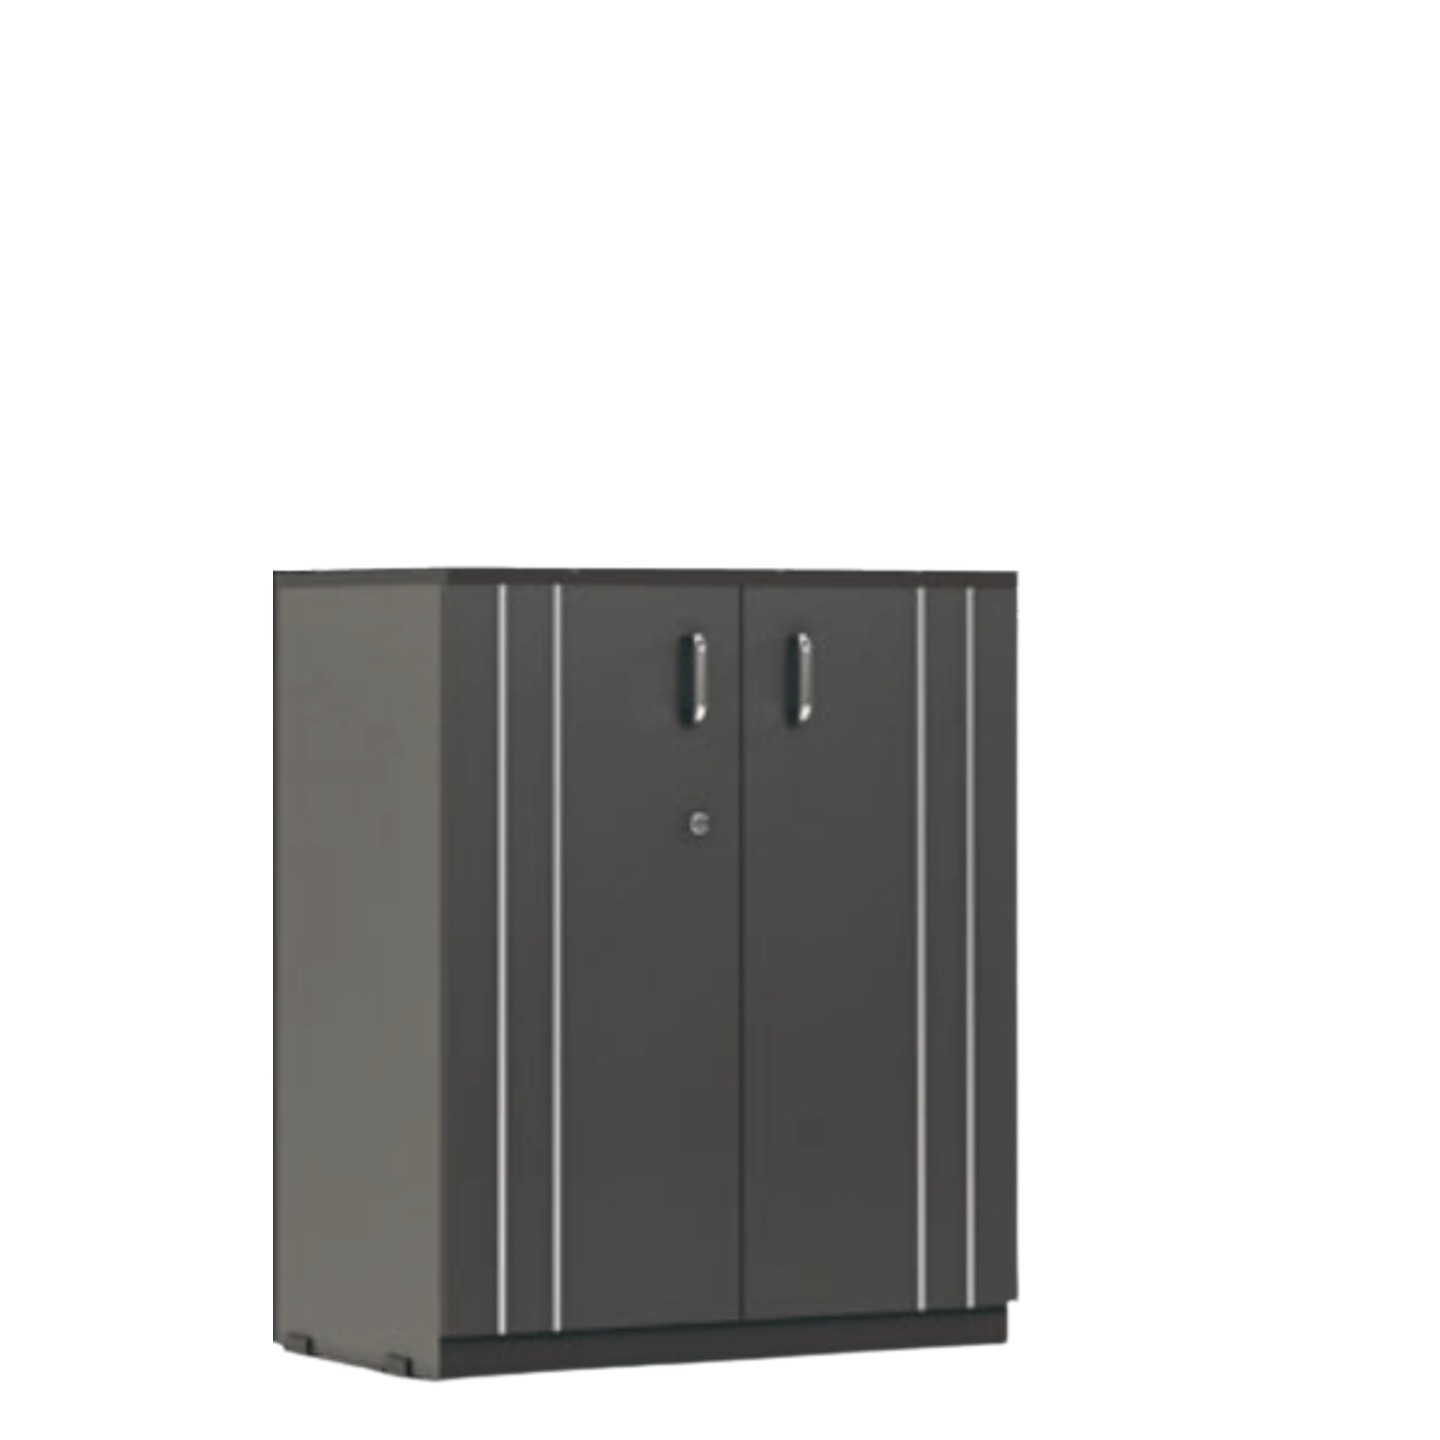 RFL Office Storwell 2 Door File Cabinet  In Wenge Colour